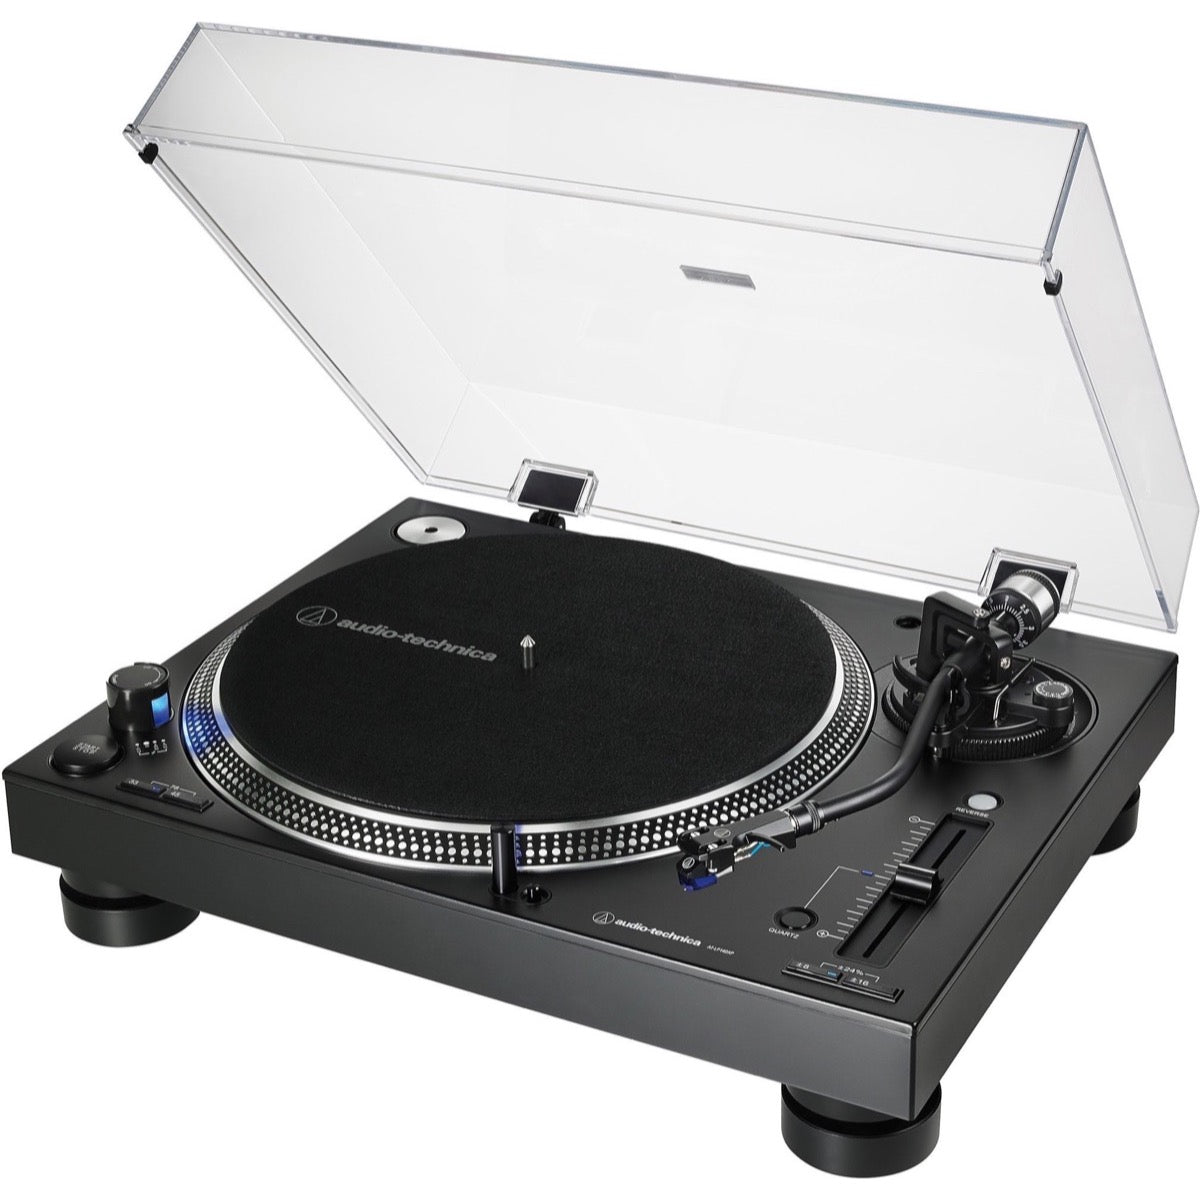 Audio-Technica AT-LP140XP Direct-Drive Turntable, Black